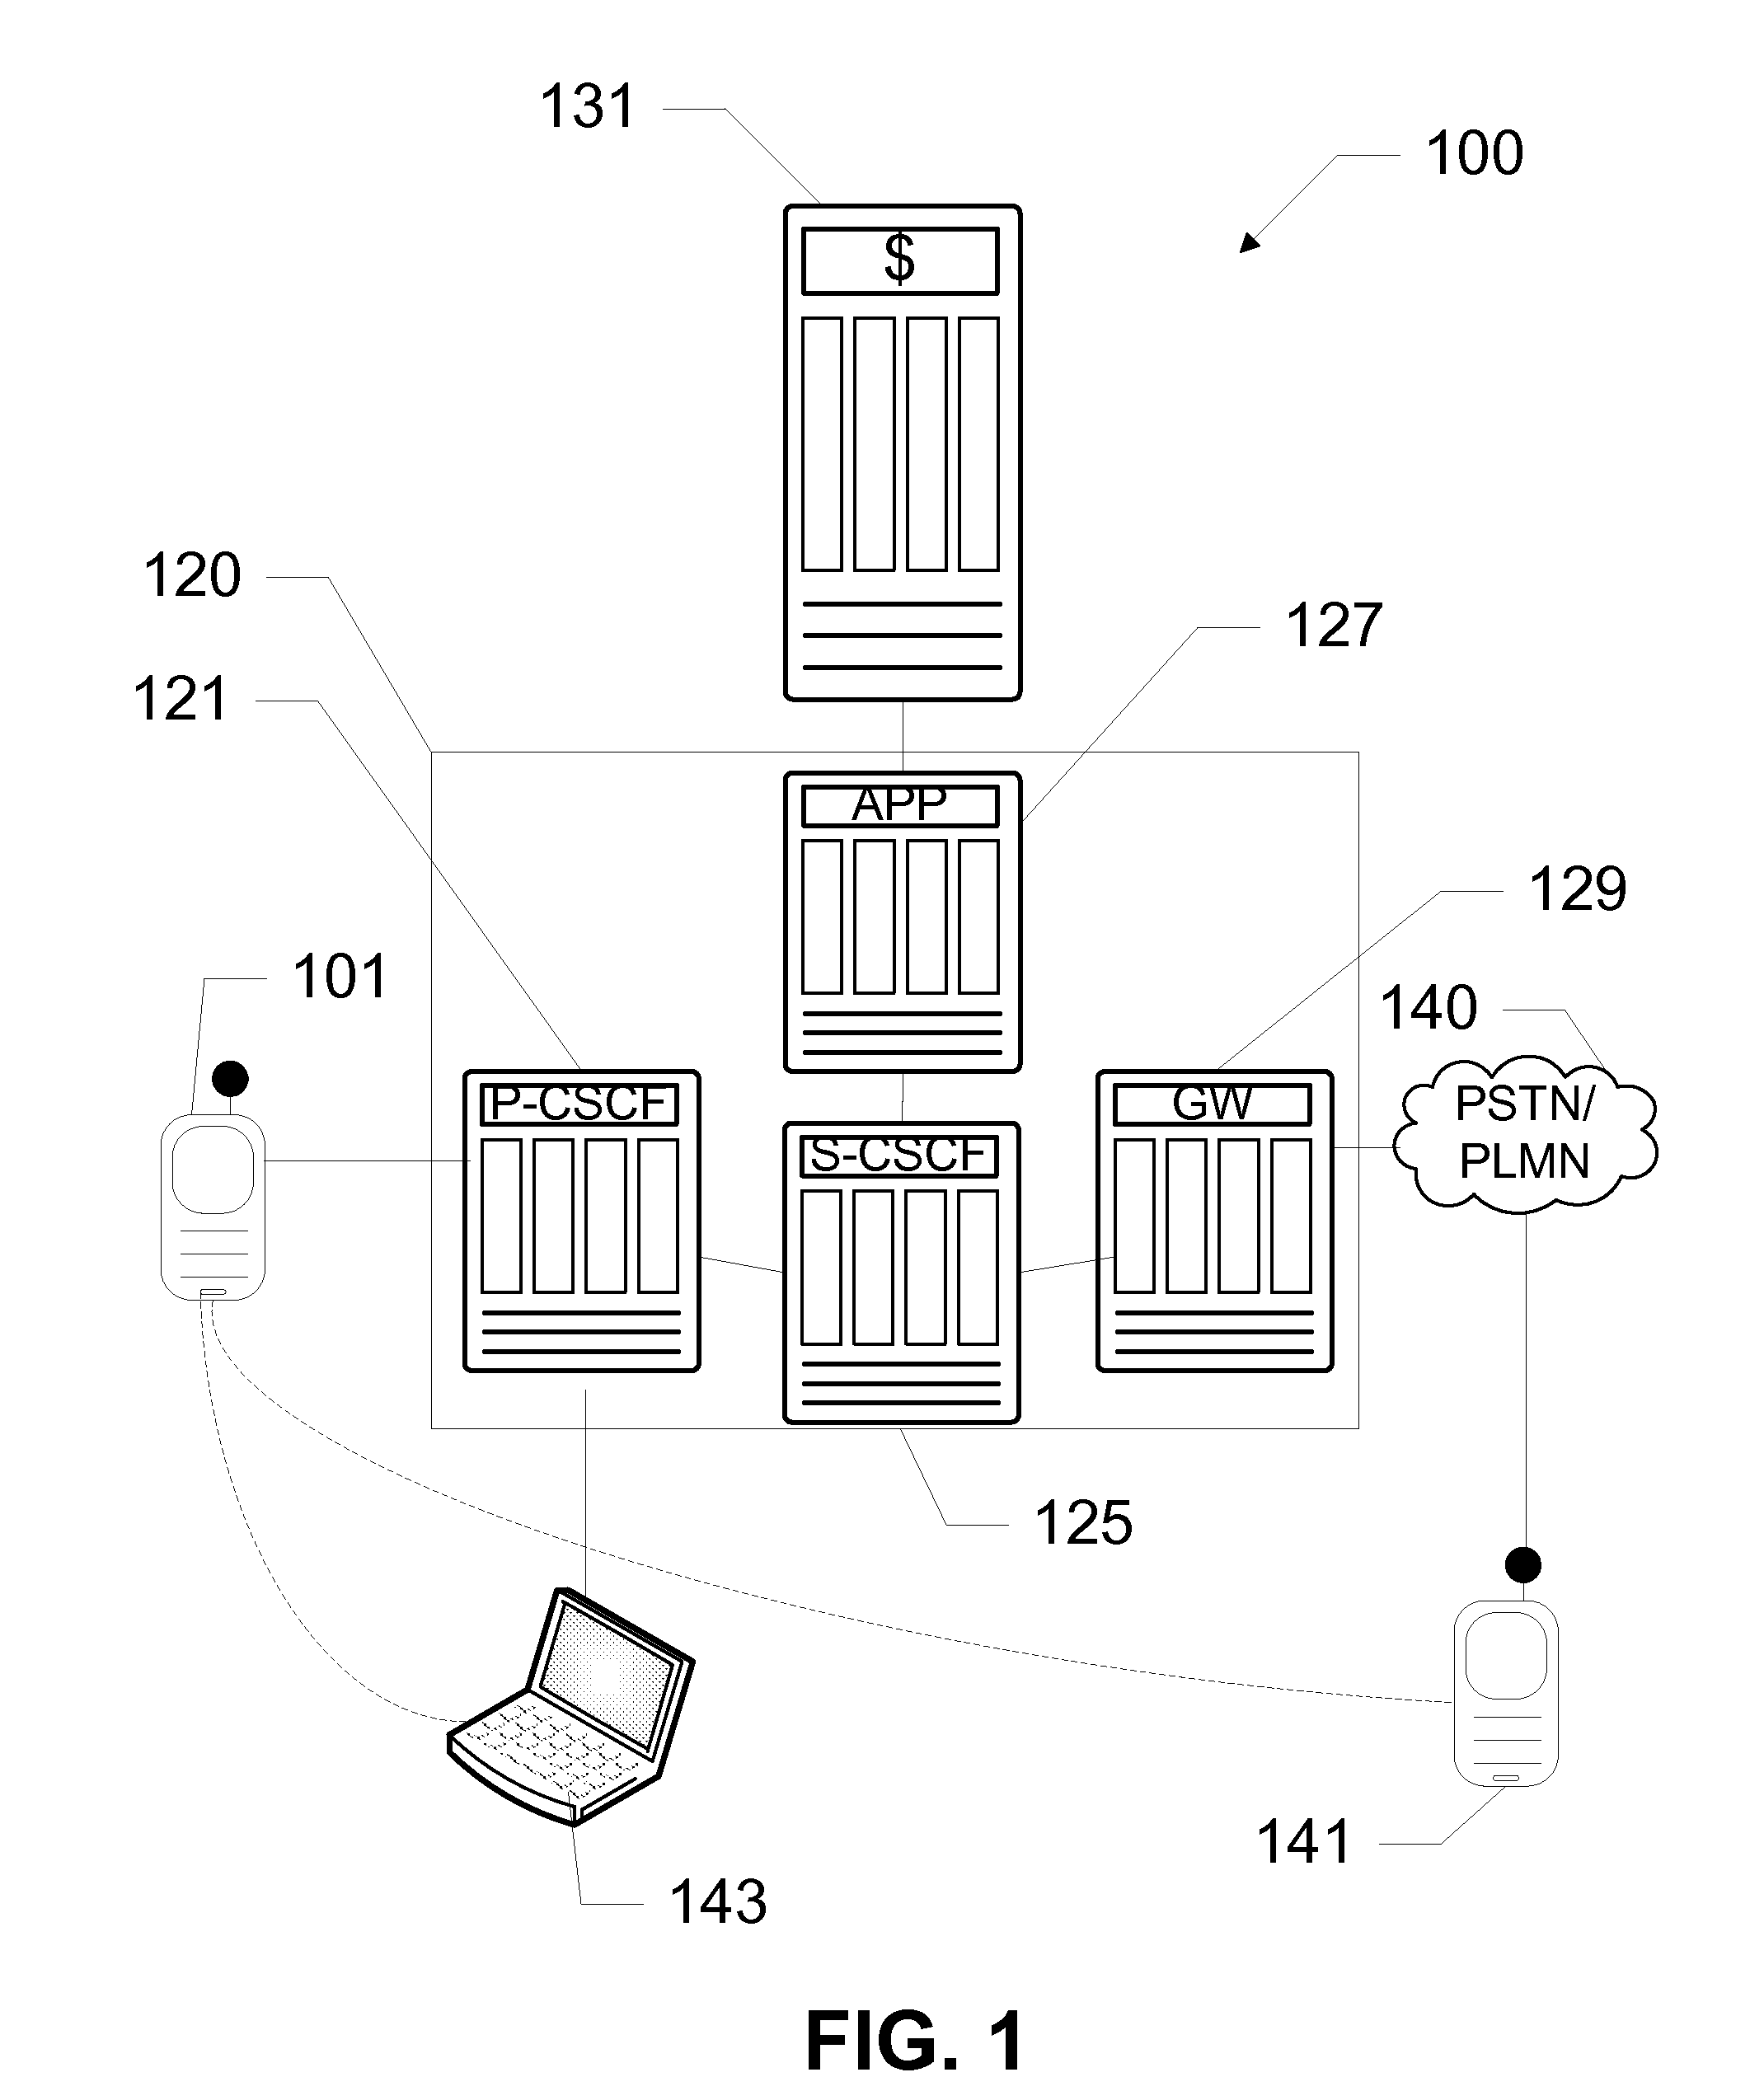 Network Servers, Systems, and Methods for Multiple Personas on a Mobile Device